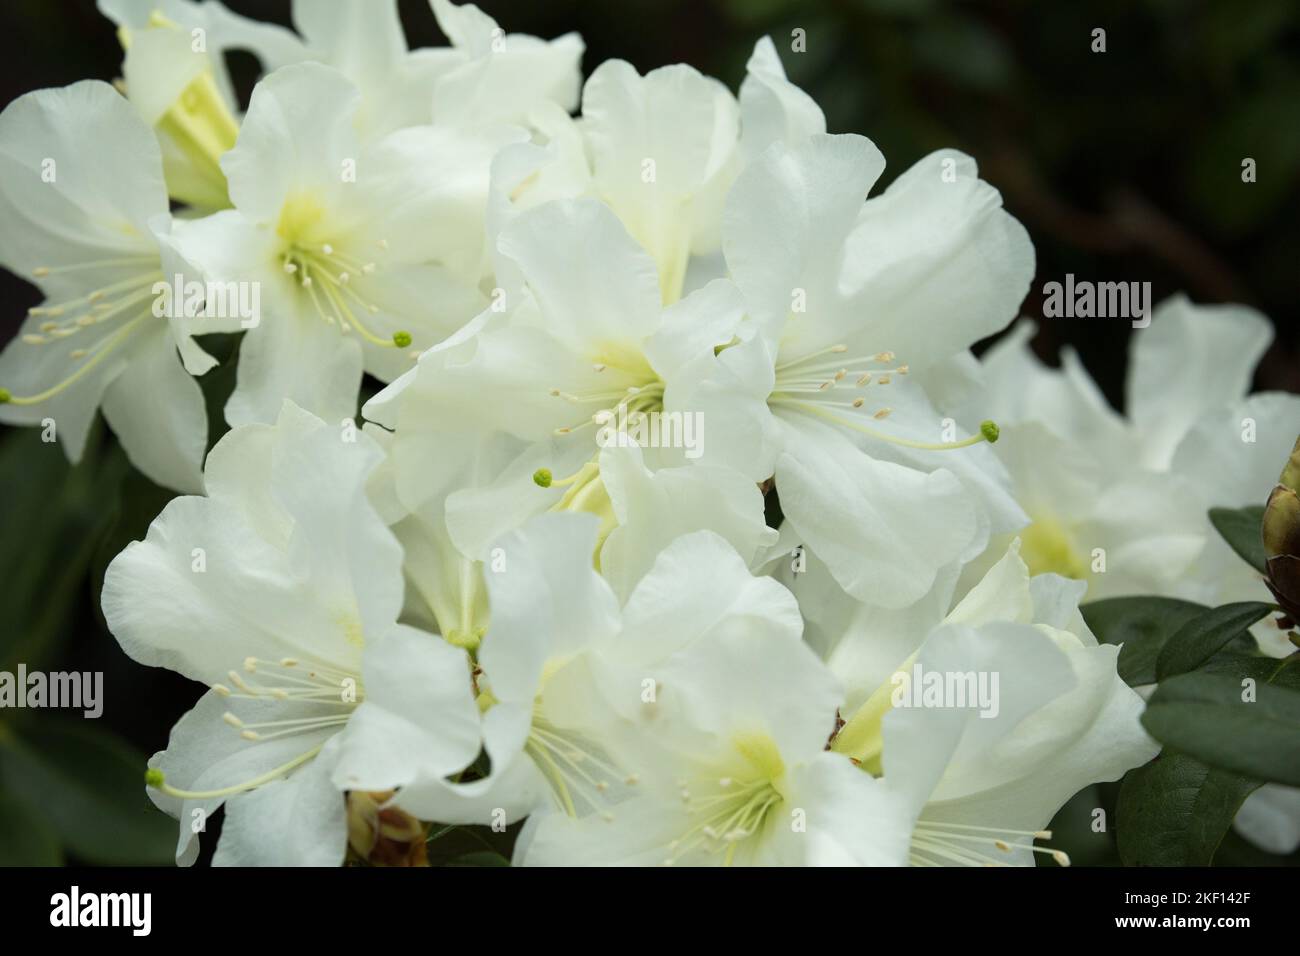 Bright white Rhododendron blossoms. The core of the flowers has a delicate, spotted yellow pattern, the feather dusters are white. Stock Photo